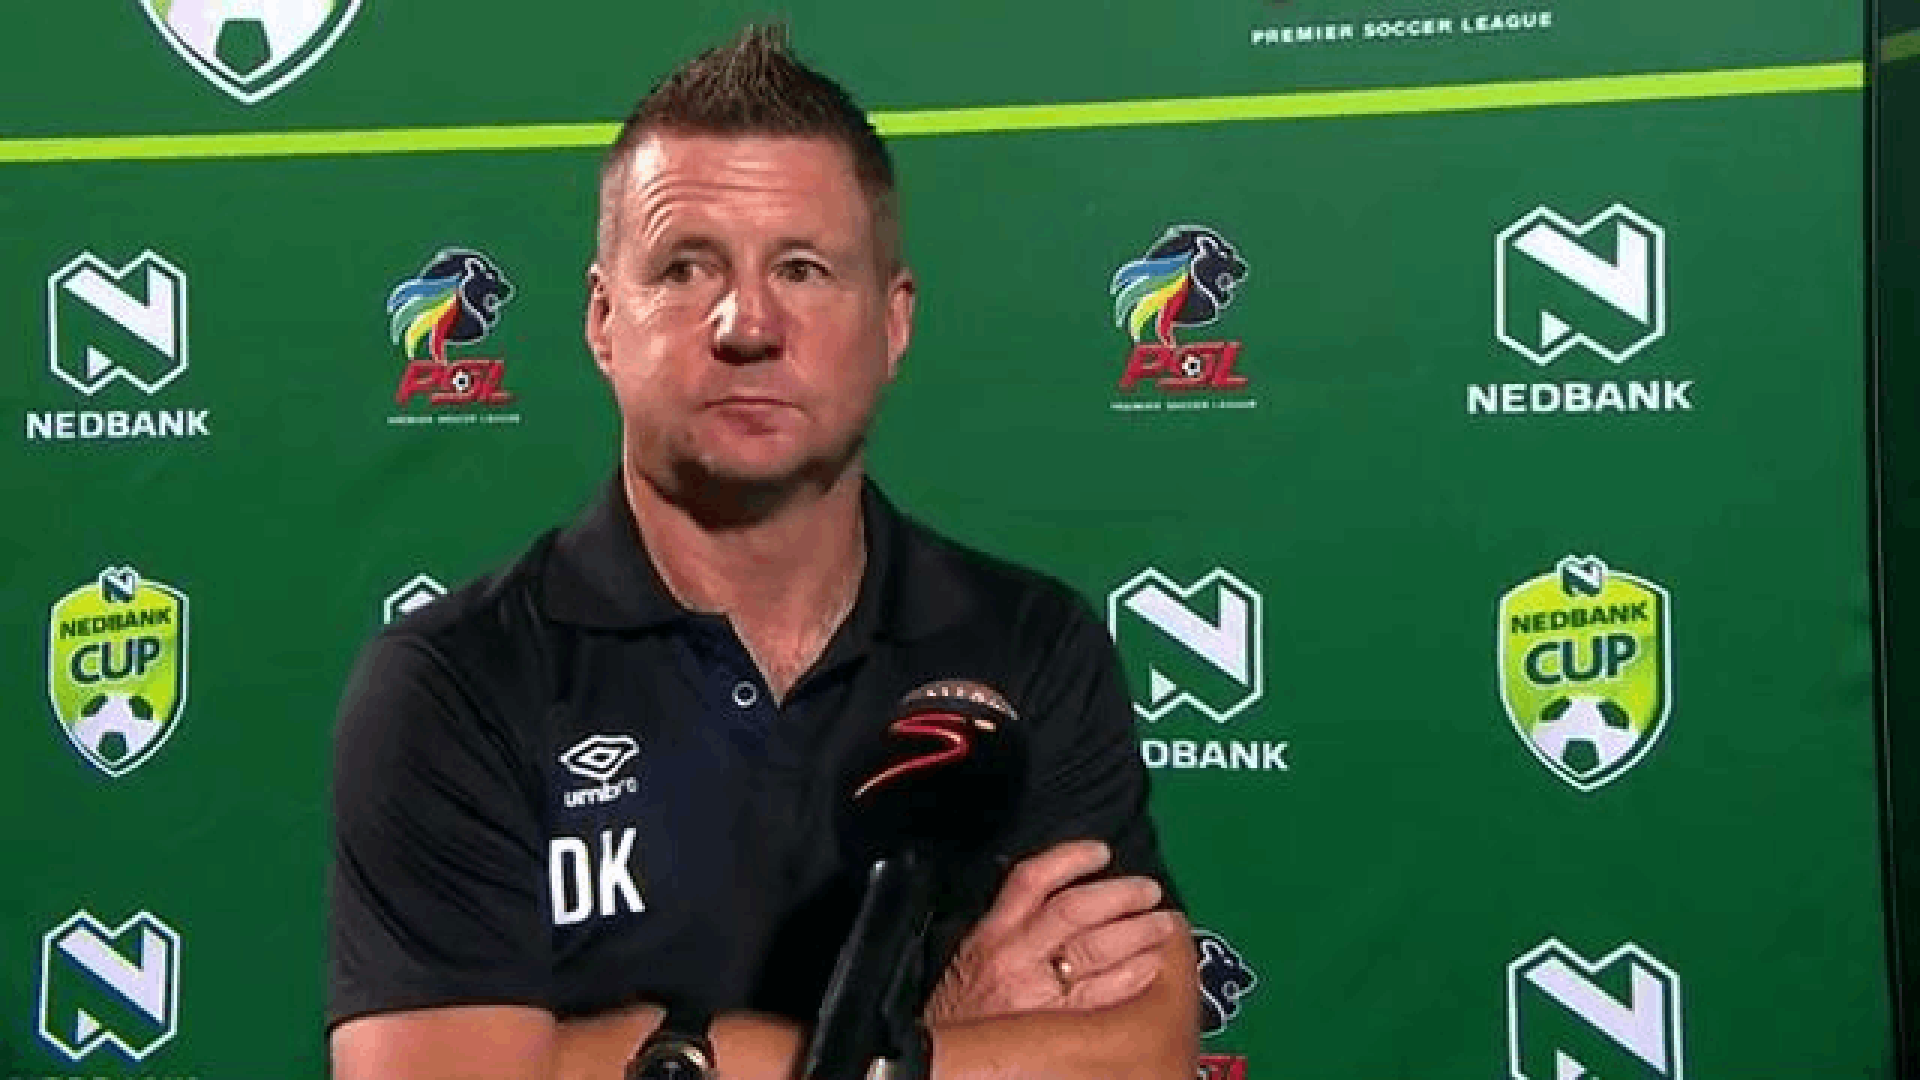 Nedbank Cup | Swallows v Royal AM | Post-match interview with Dylan Kerr